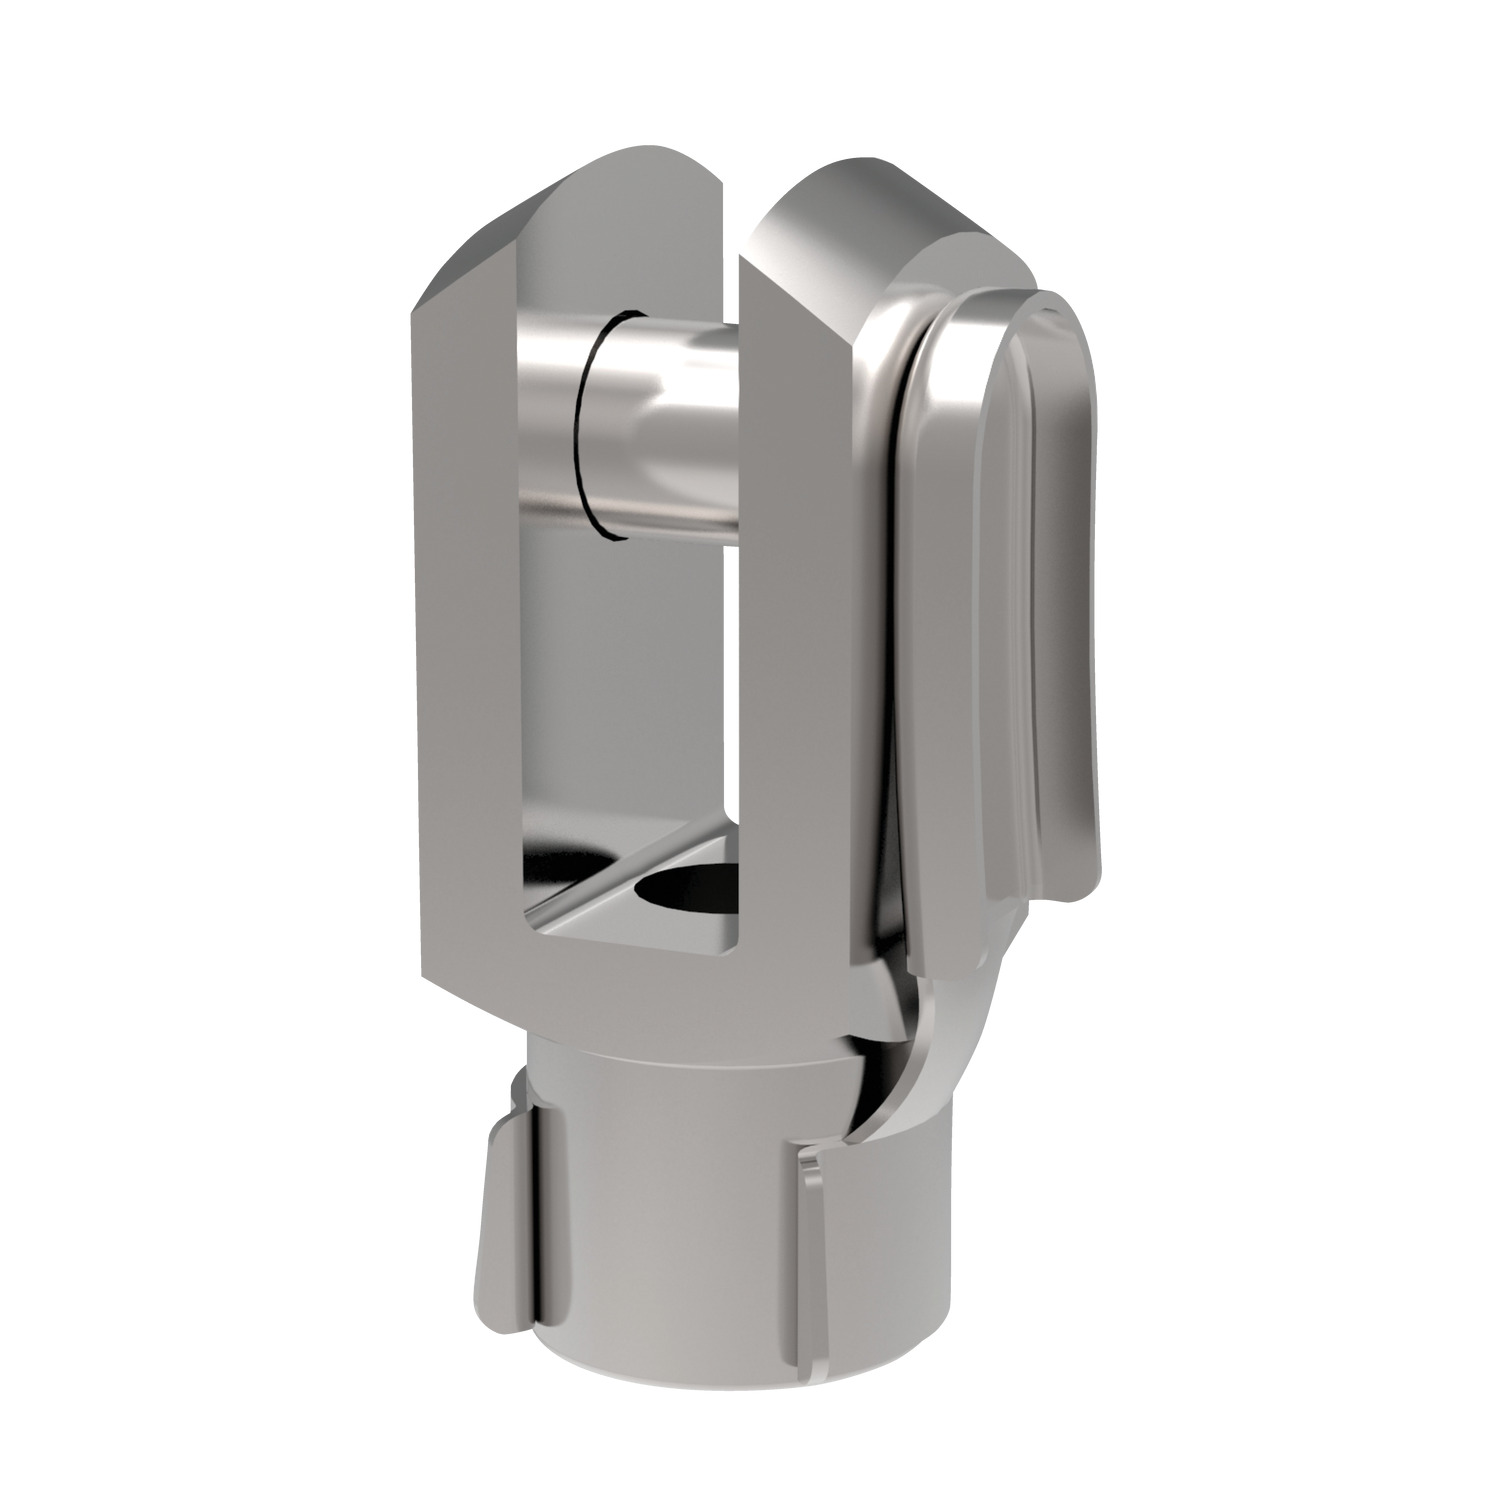 Steel Clevis Joints with Retention Clips Silver zinc-plated. Standard thread is right hand (for left hand, see R3388).